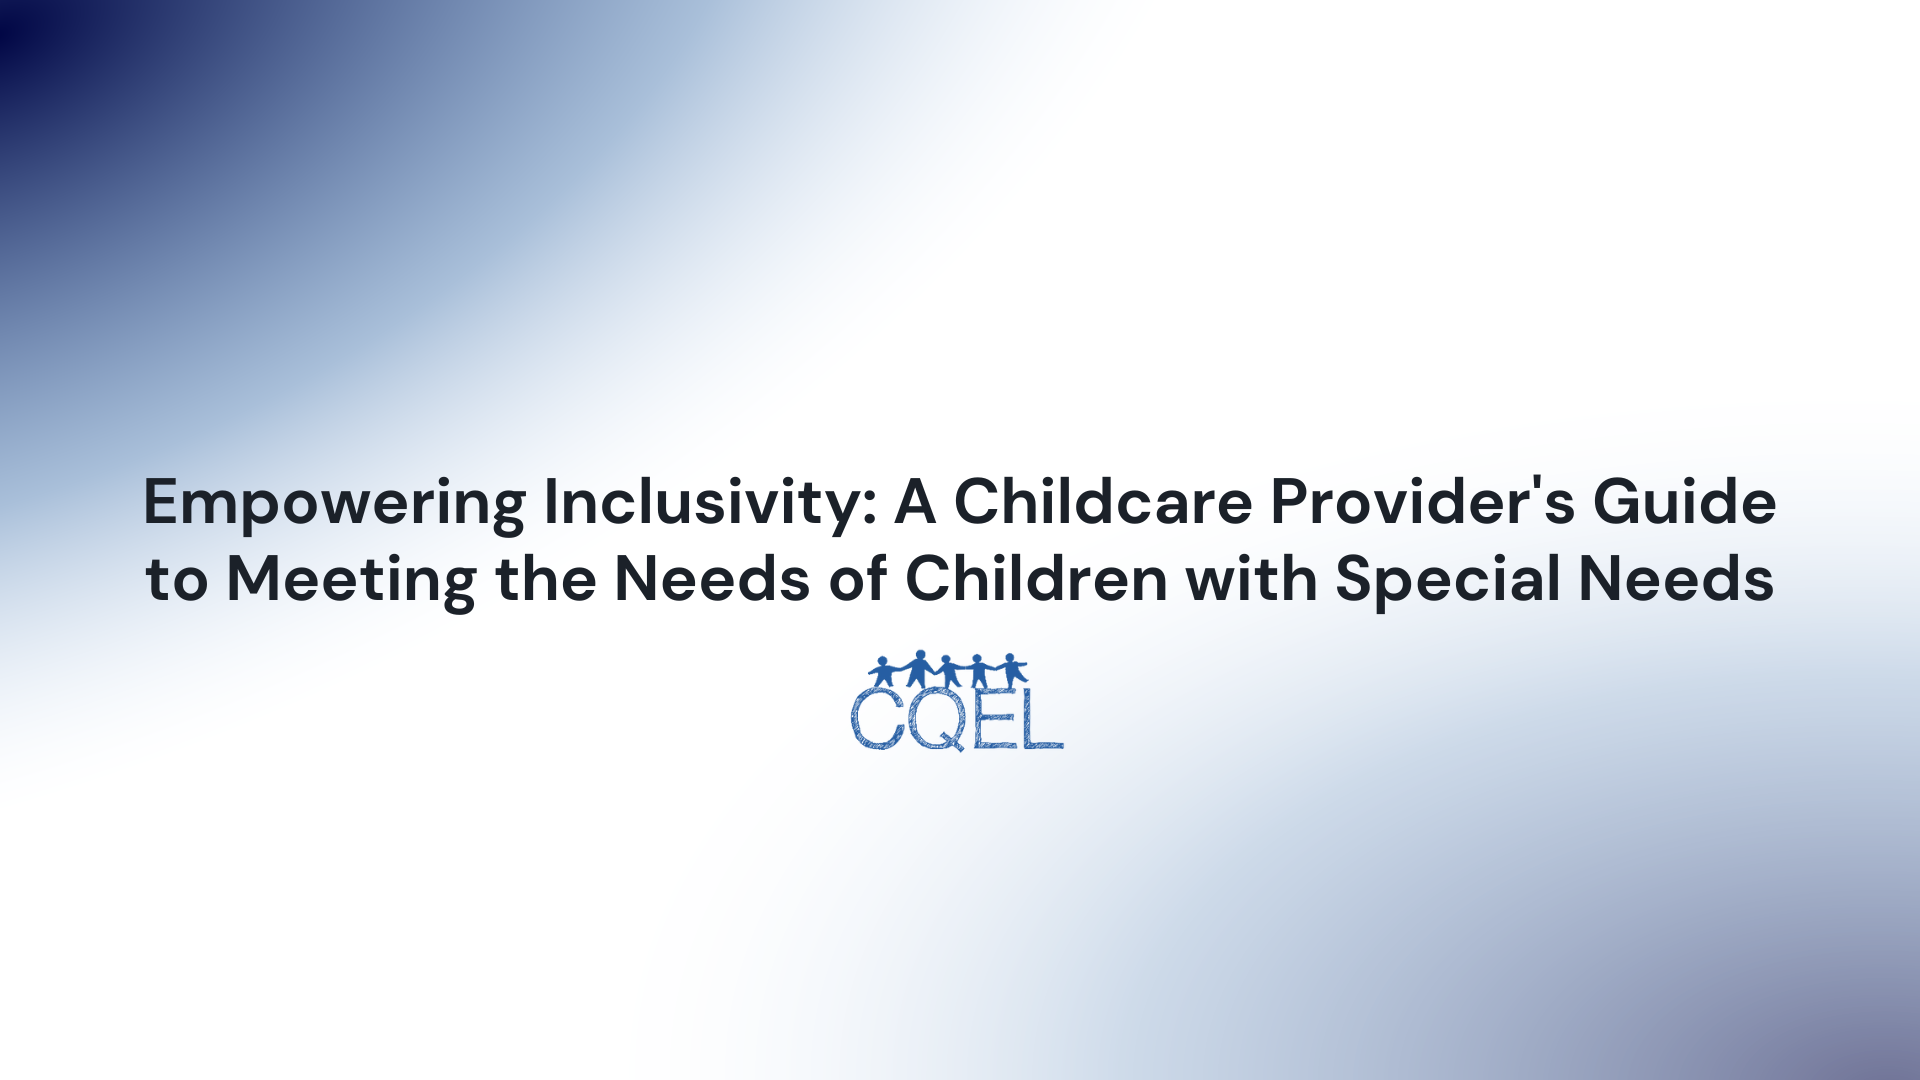 Empowering Inclusivity: A Childcare Provider's Guide to Meeting the Needs of Children with Special Needs